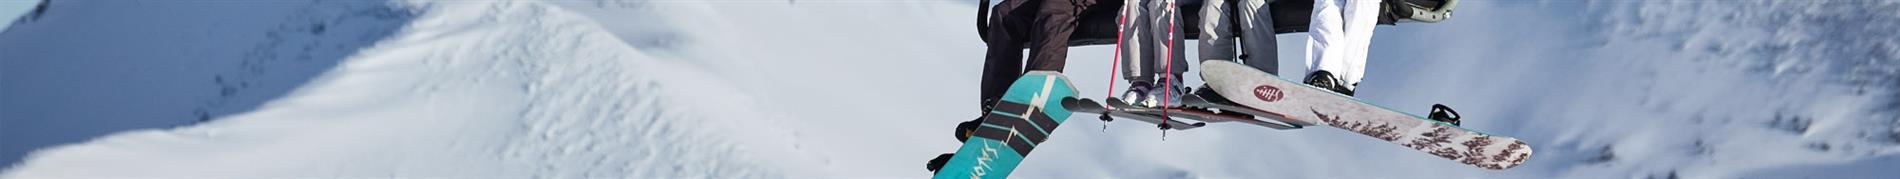 Marmot Women's skis, snowboards, and accessories for everything snow. 